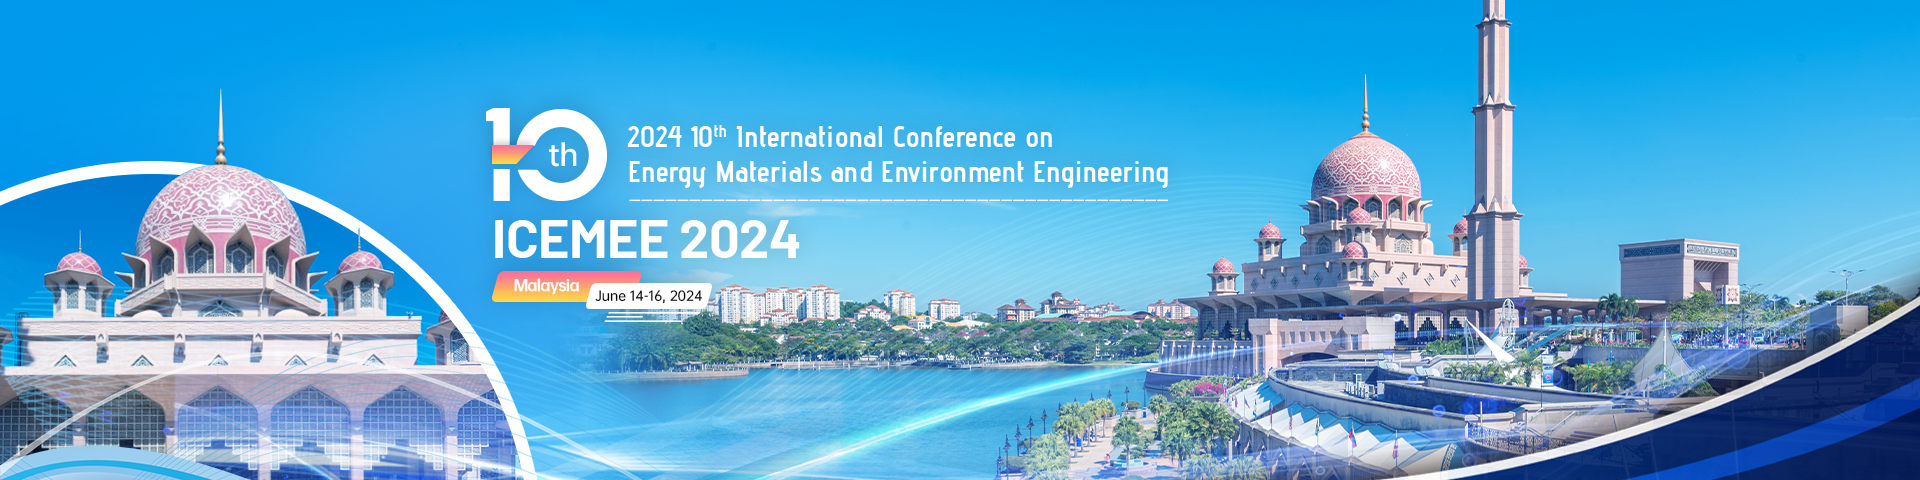 2024 10th International Conference on Energy Materials and Environment Engineering（ICEMEE 2024）, Online Event